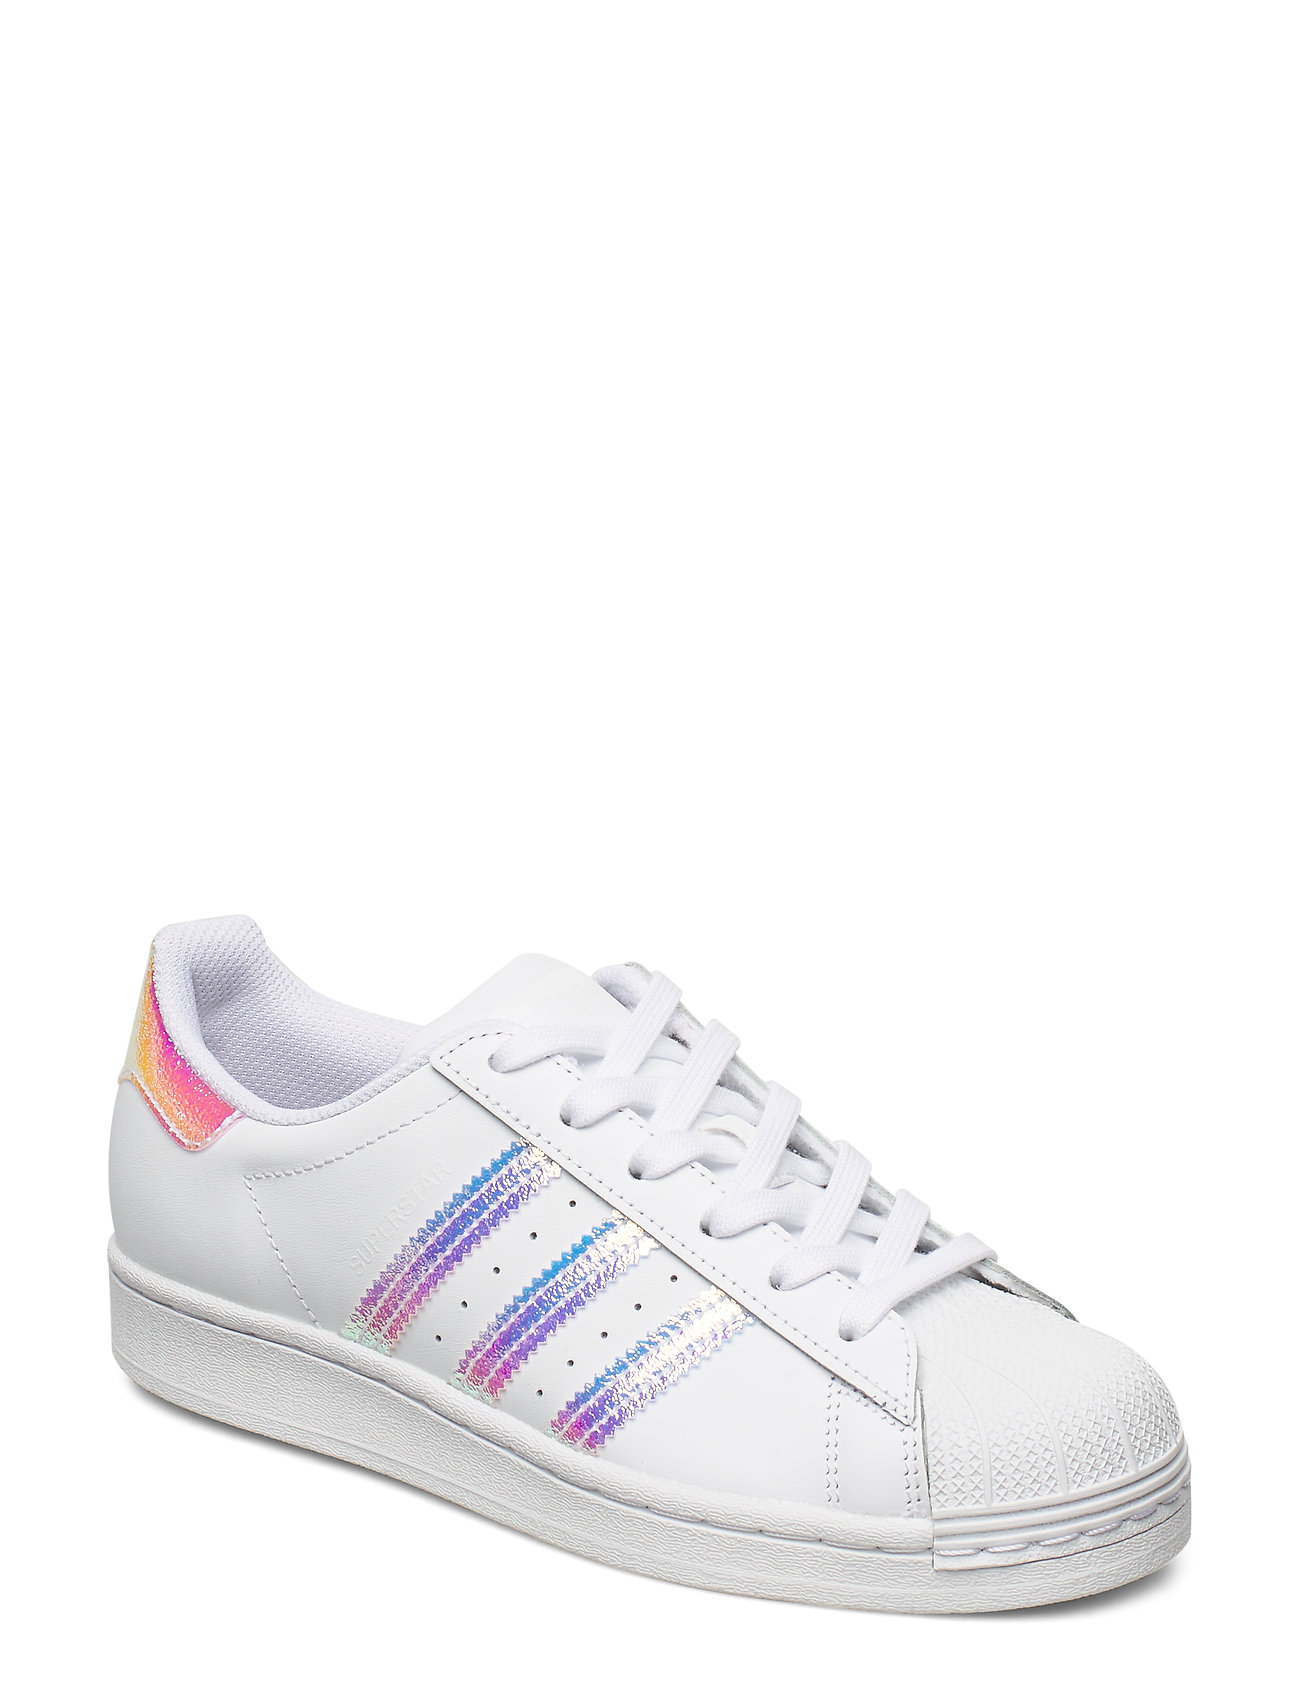 Superstar Shoes Sport Sneakers Low-top Sneakers White Adidas Originals